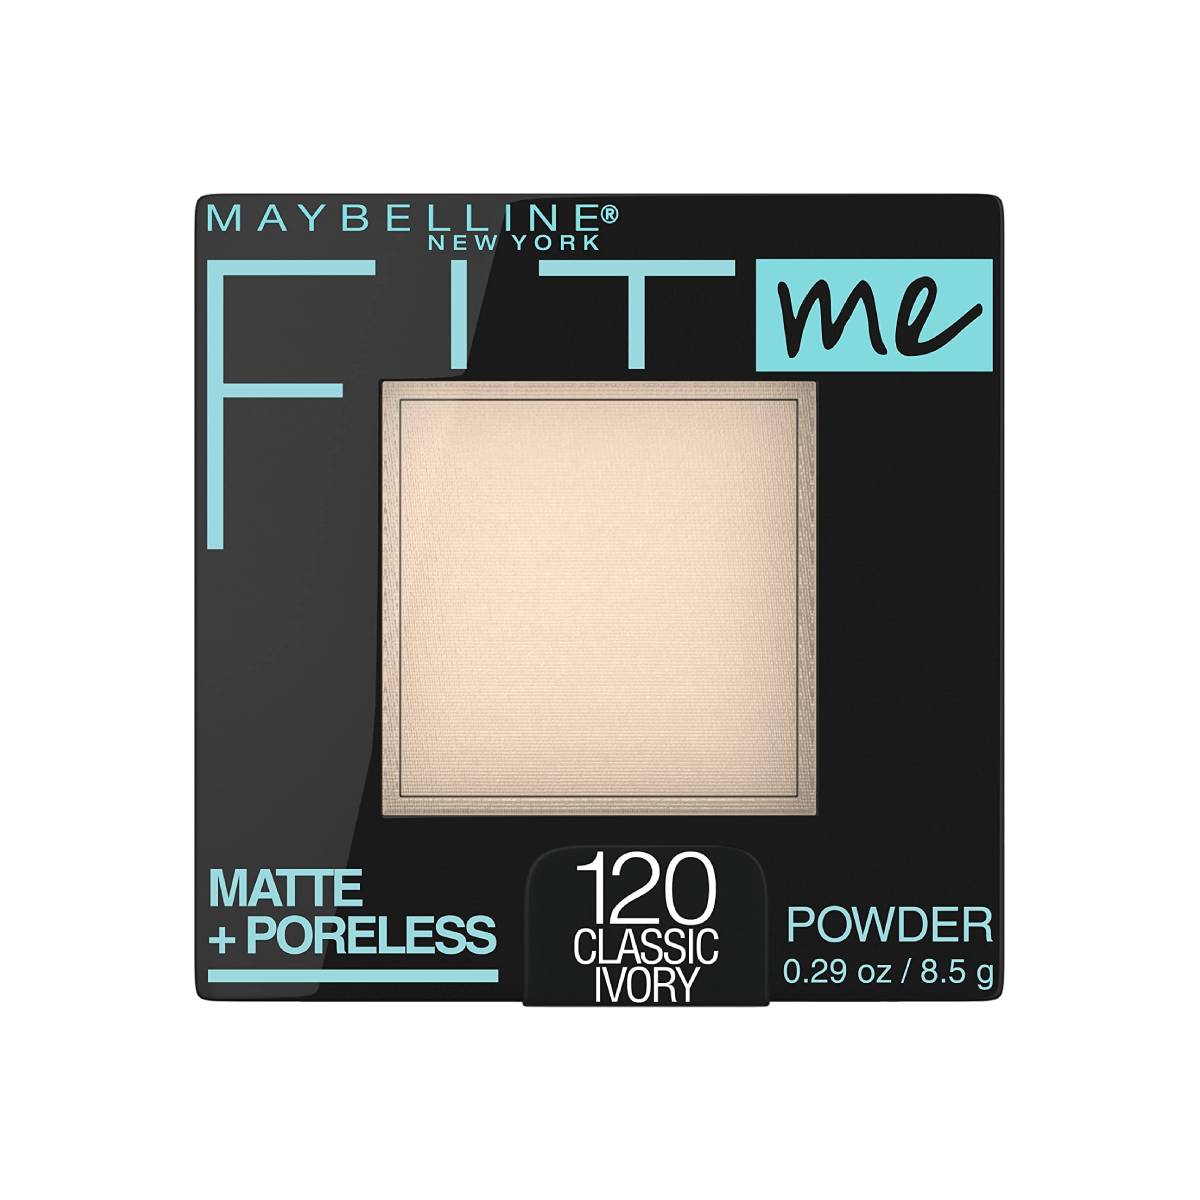 FIT ME POLVO COMPACTO MATIFICANTE - MAYBELLINE